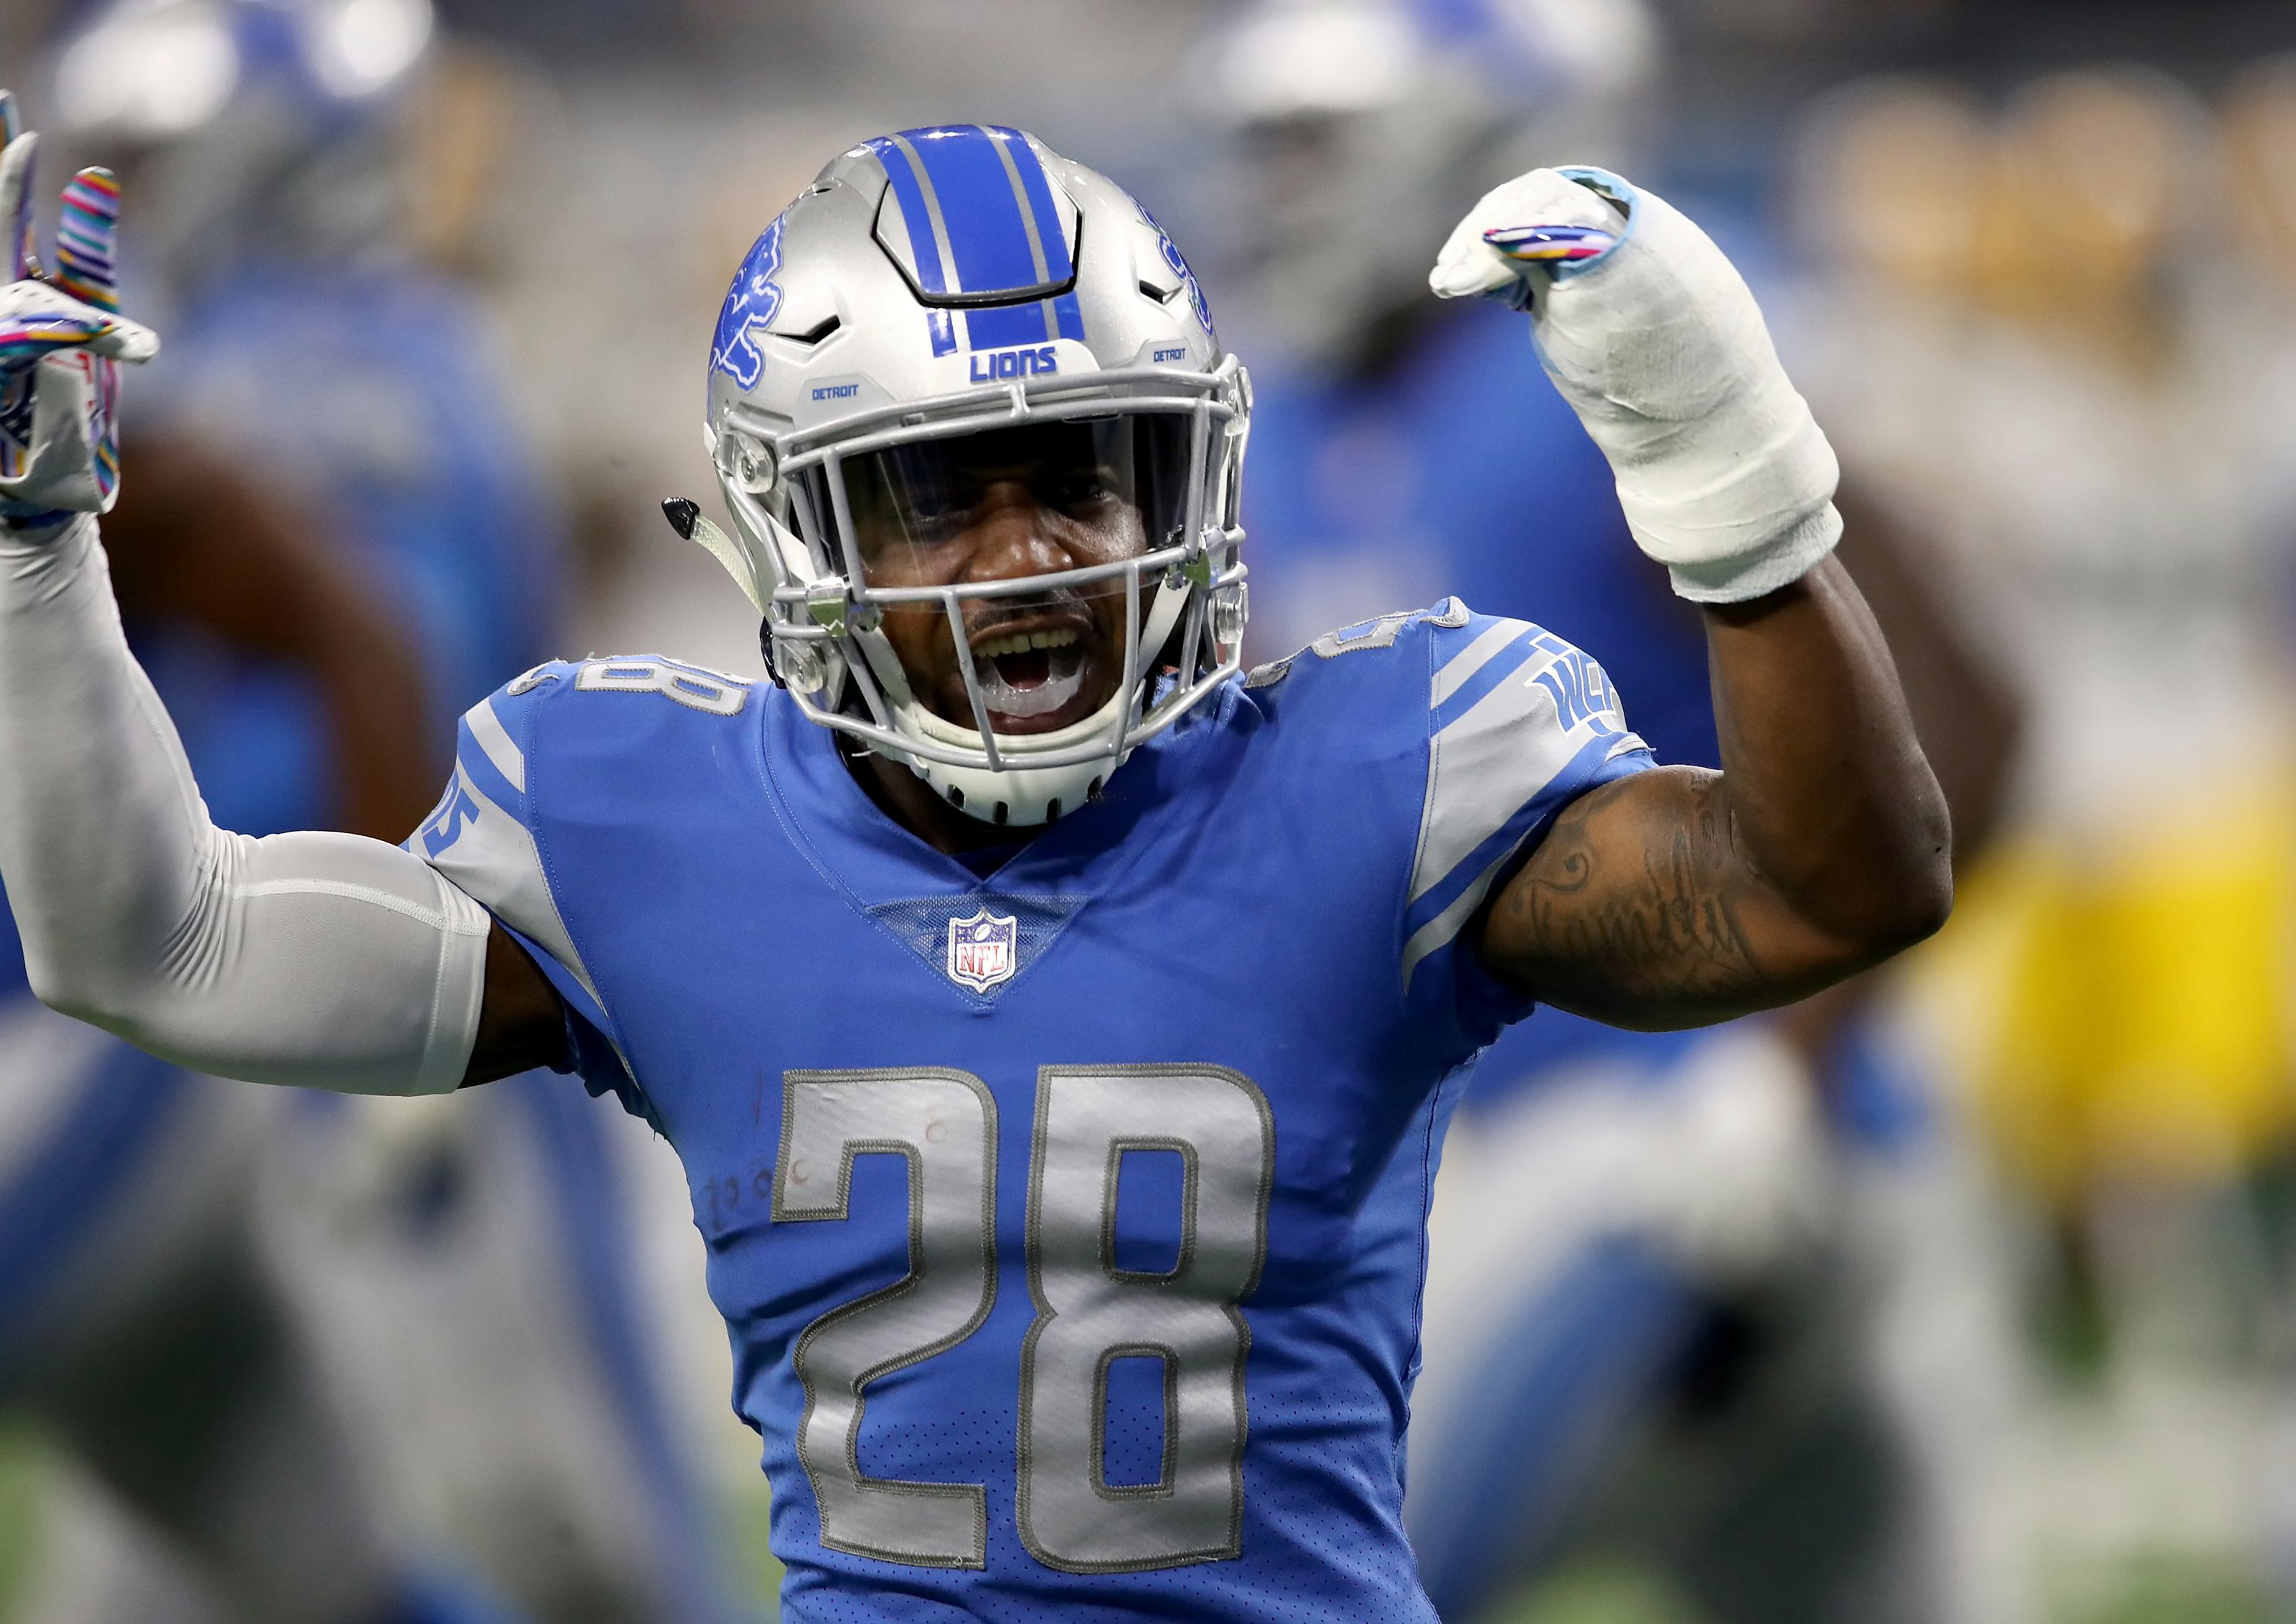 Lions vs. Seahawks: Full game preview by position - Page 8